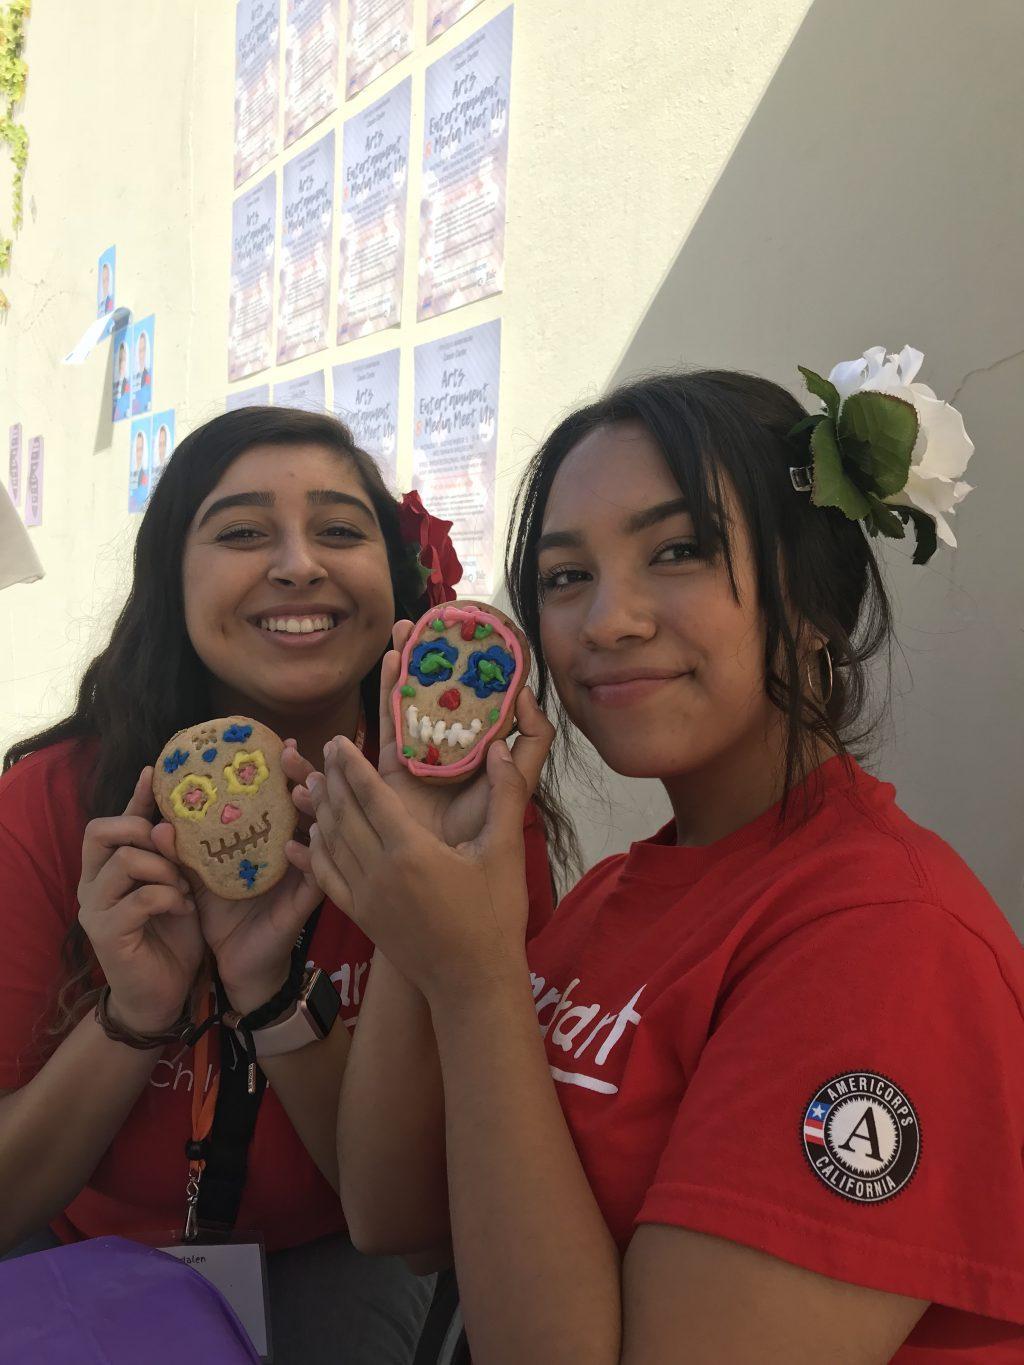 Celeste Benitez (right) decorates a colorful Día de los Muertos cookie with her friend and fellow LSA member Madalen Carrera on campus in November 2018. The pair tabled by the Rock on the Malibu Campus to promote the LSA's Noche de Altares (Night of the Alters) event. Photo courtesy of Celeste Benitez